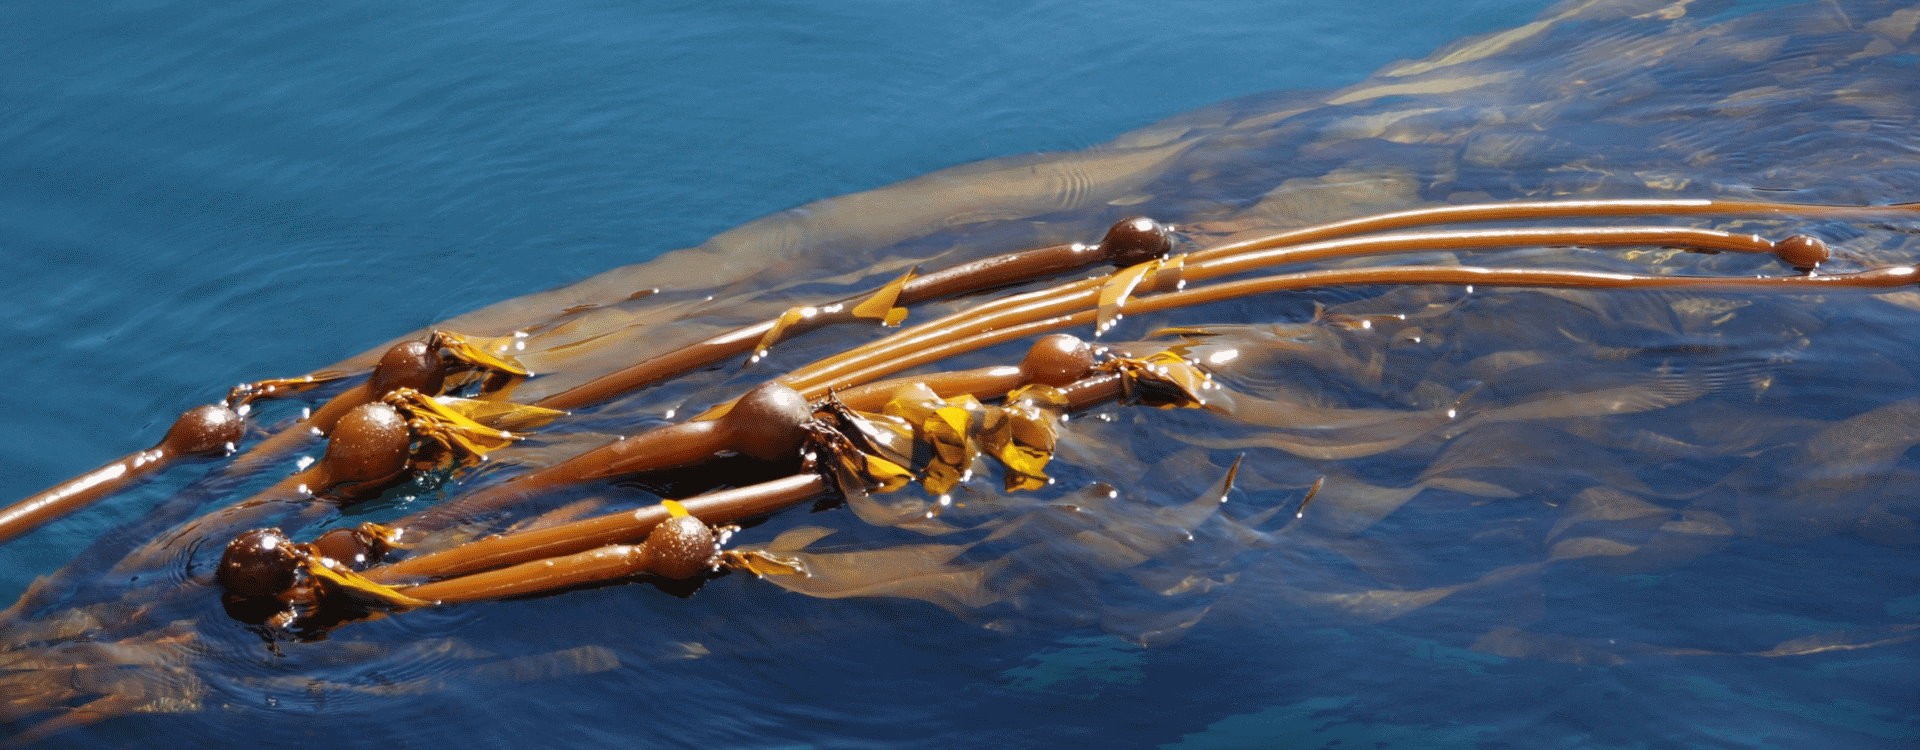 Sea Kelp, a Natural Source of Iodine - Find the Seaweed Benefits